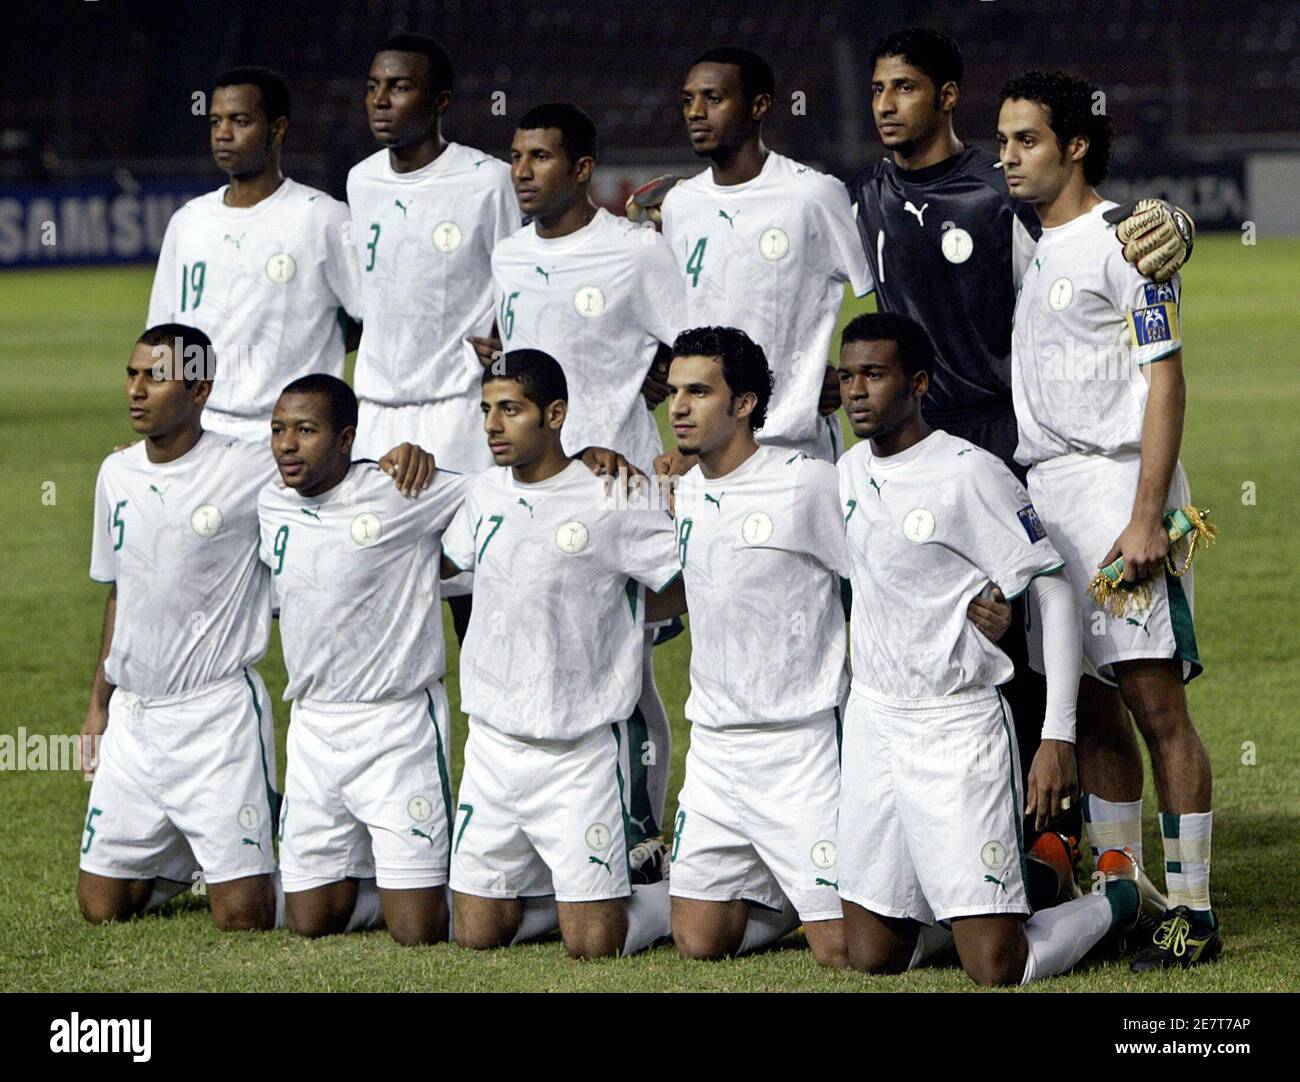 Saudi Arabia's players pose for a team photo before their 2007 AFC Asian  Cup quarter-final soccer match against Uzbekistan in Gelora Bung Karno  Stadium in Jakarta July 22, 2007. REUTERS/Beawiharta (INDONESIA Stock